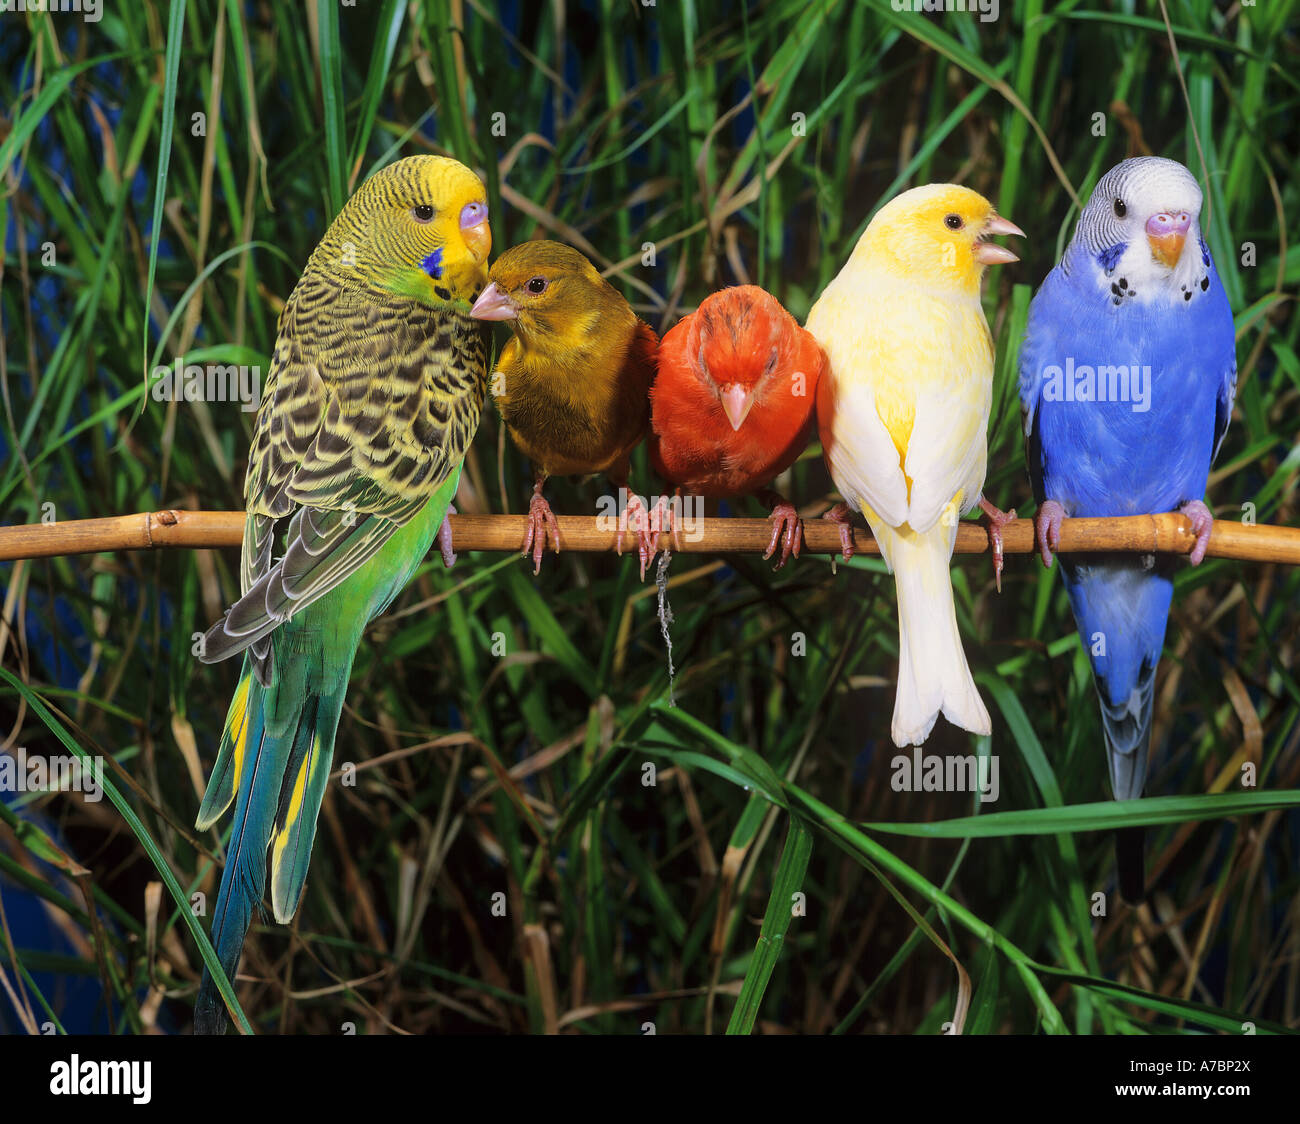 two budgies and three canaries on twig Stock Photo